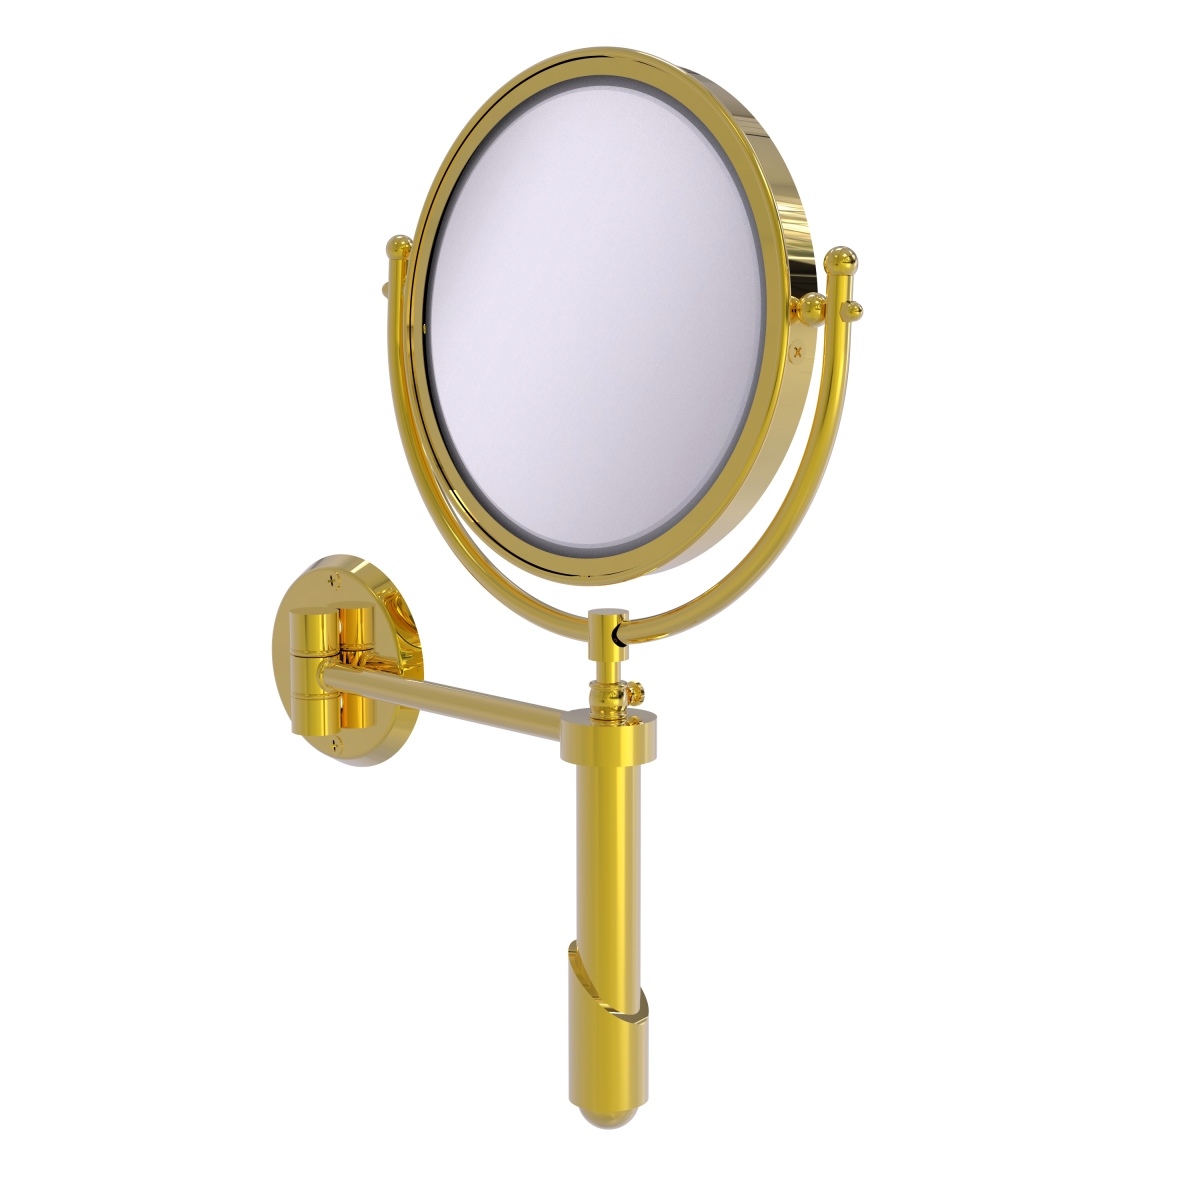 SHM-8-4X-PB 8 in. dia. Soho Collection Wall Mounted Make-Up Mirror with 4X Magnification, Polished Brass -  Allied Brass, SHM-8/4X-PB